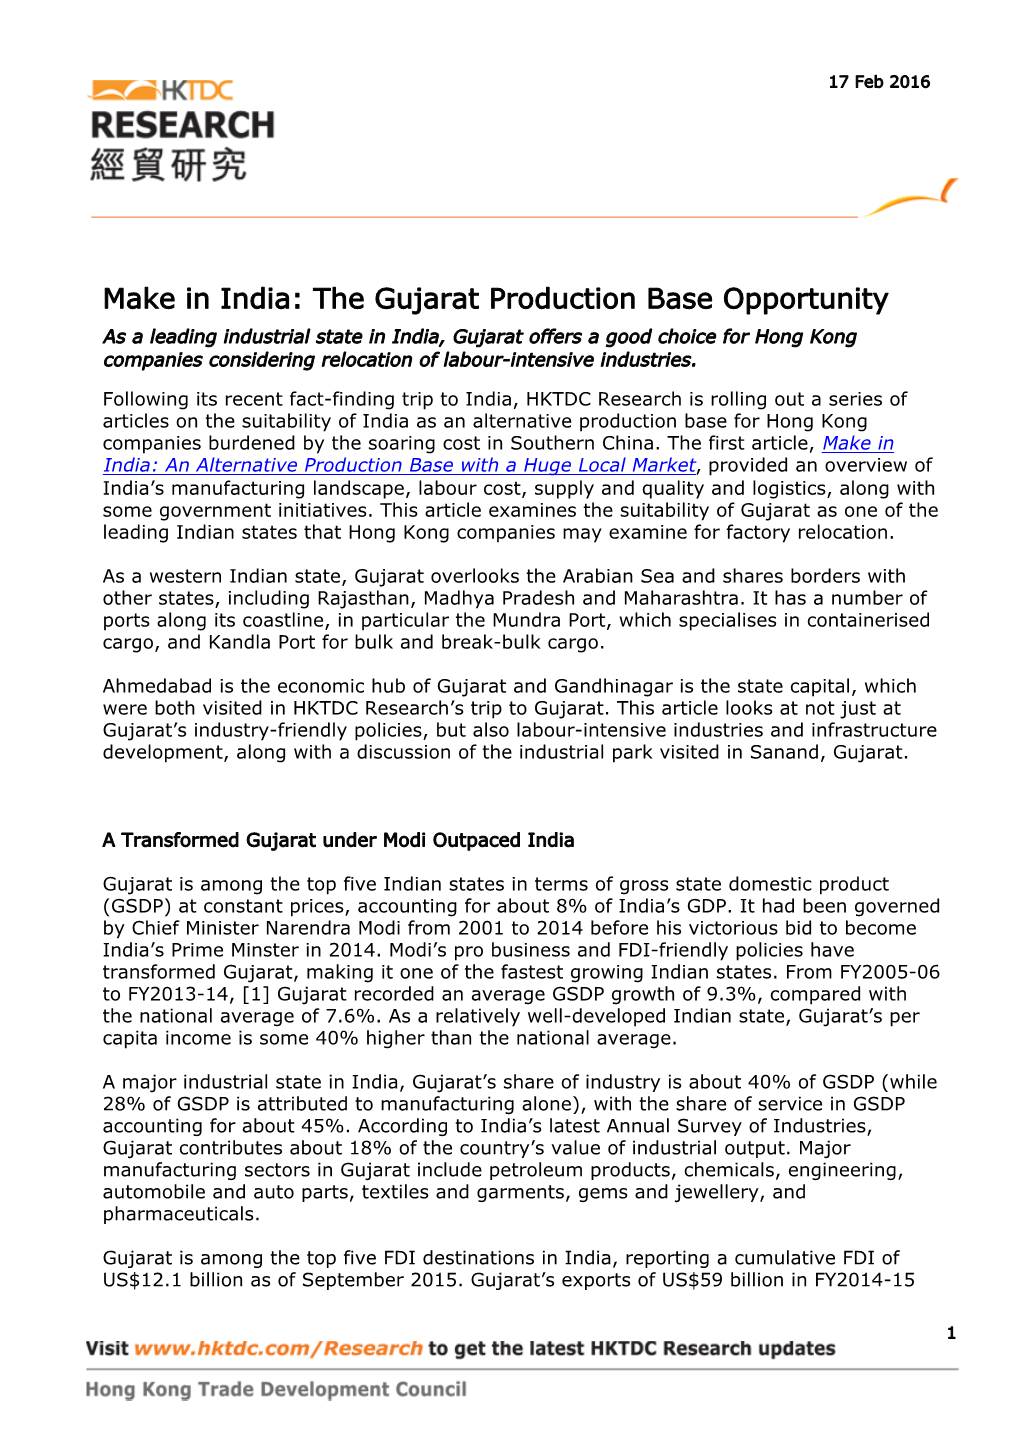 Make in India: the Gujarat Production Base Opportunity